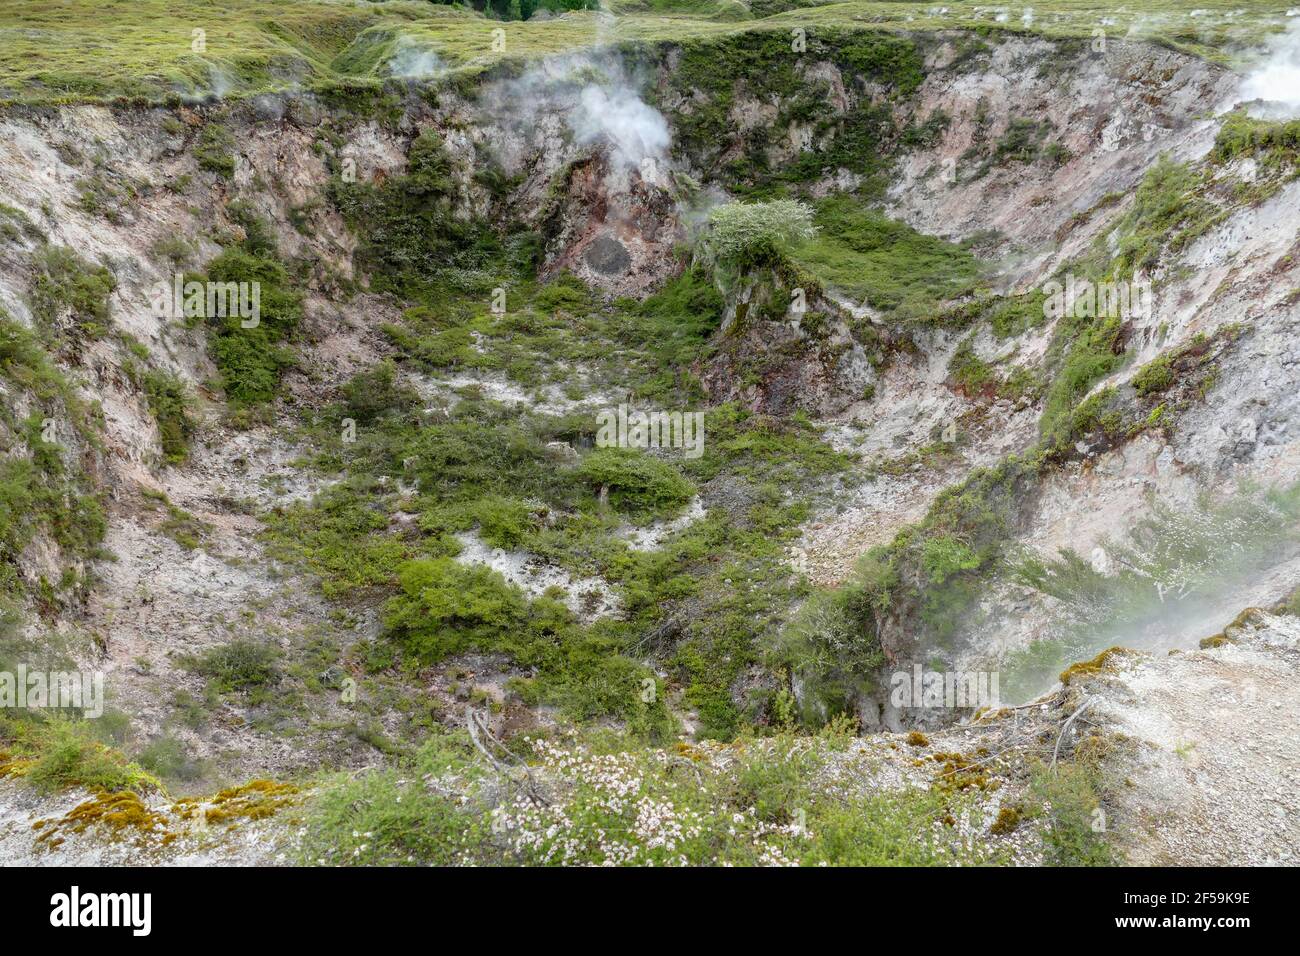 geothermal site in New Zealand named Craters of the Moon Stock Photo